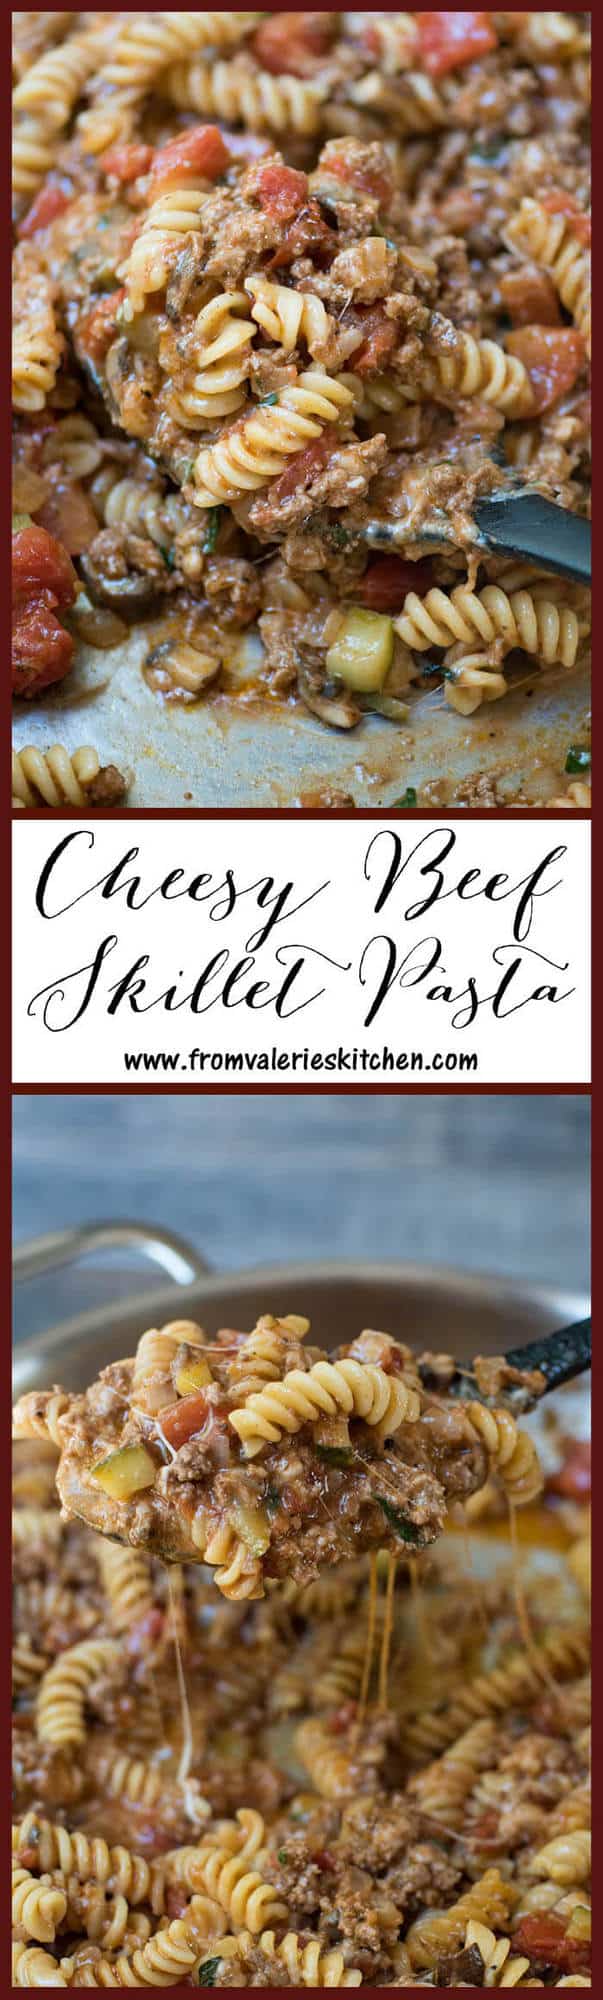 Two images of Cheesy Beef Skillet Pasta with text overlay.